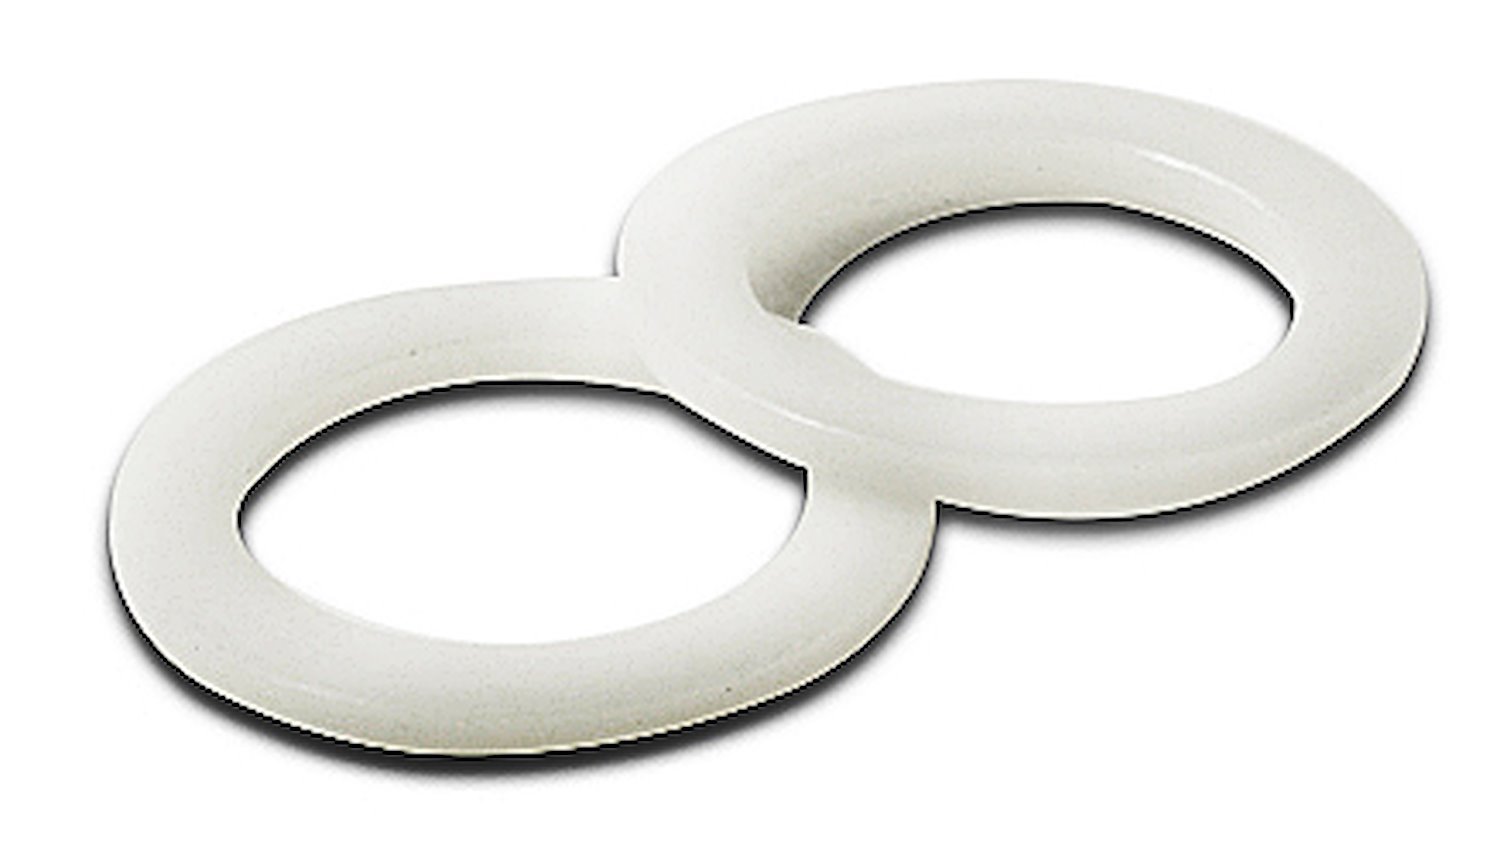 PTFE Washers -10 AN